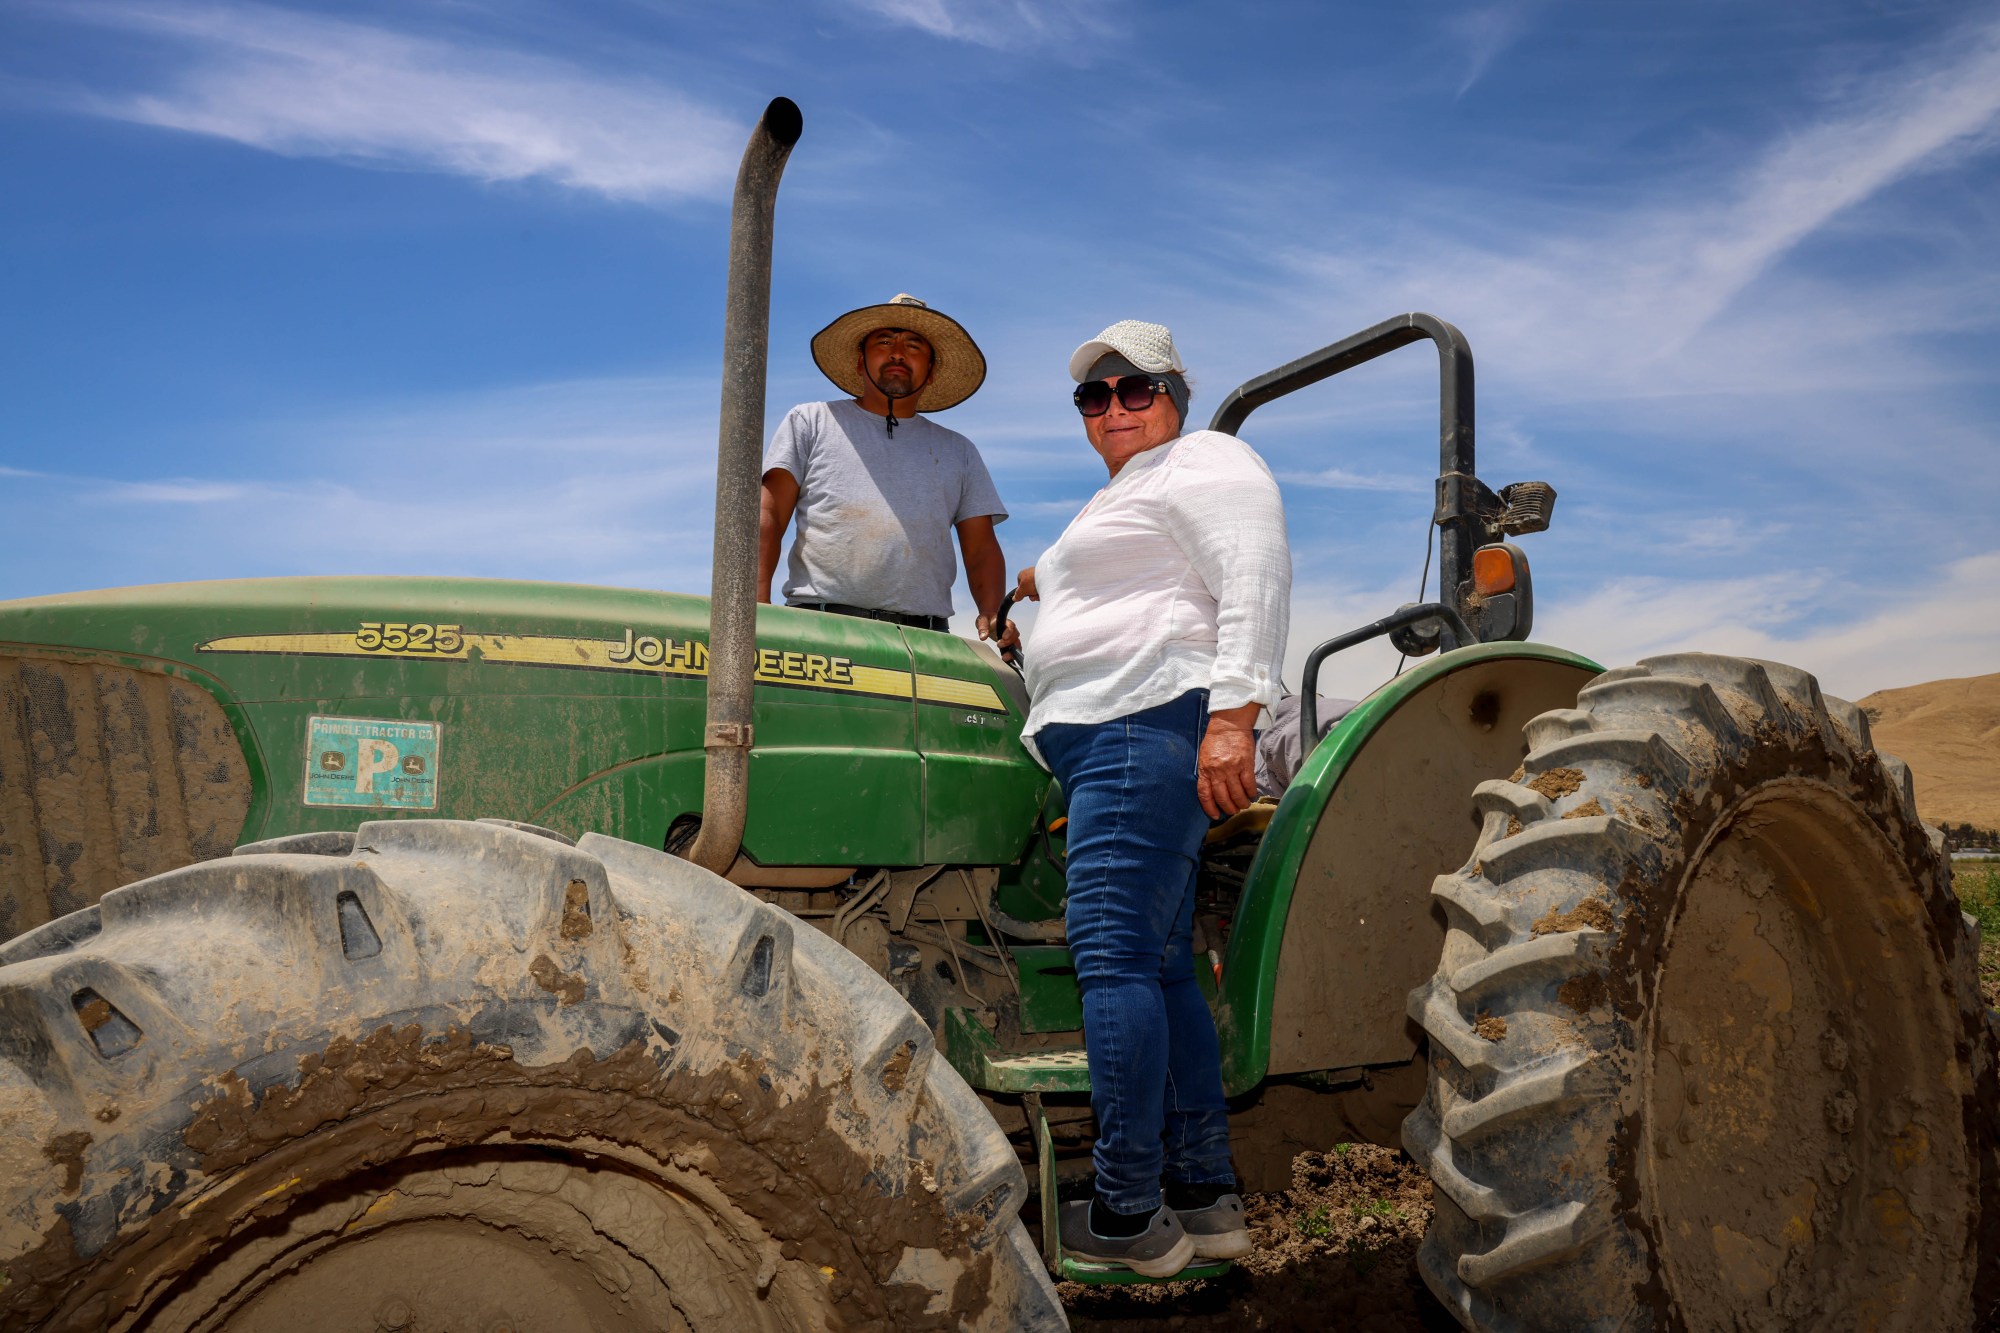 Maria Catalan, right, founder of the organic Catalan Family Farms, stands on a tractor operated by her son, Julio Catalan, in the 55-acre land she leases in Hollister, Calif., on Tuesday, June 19, 2024. (Ray Chavez/Bay Area News Group)